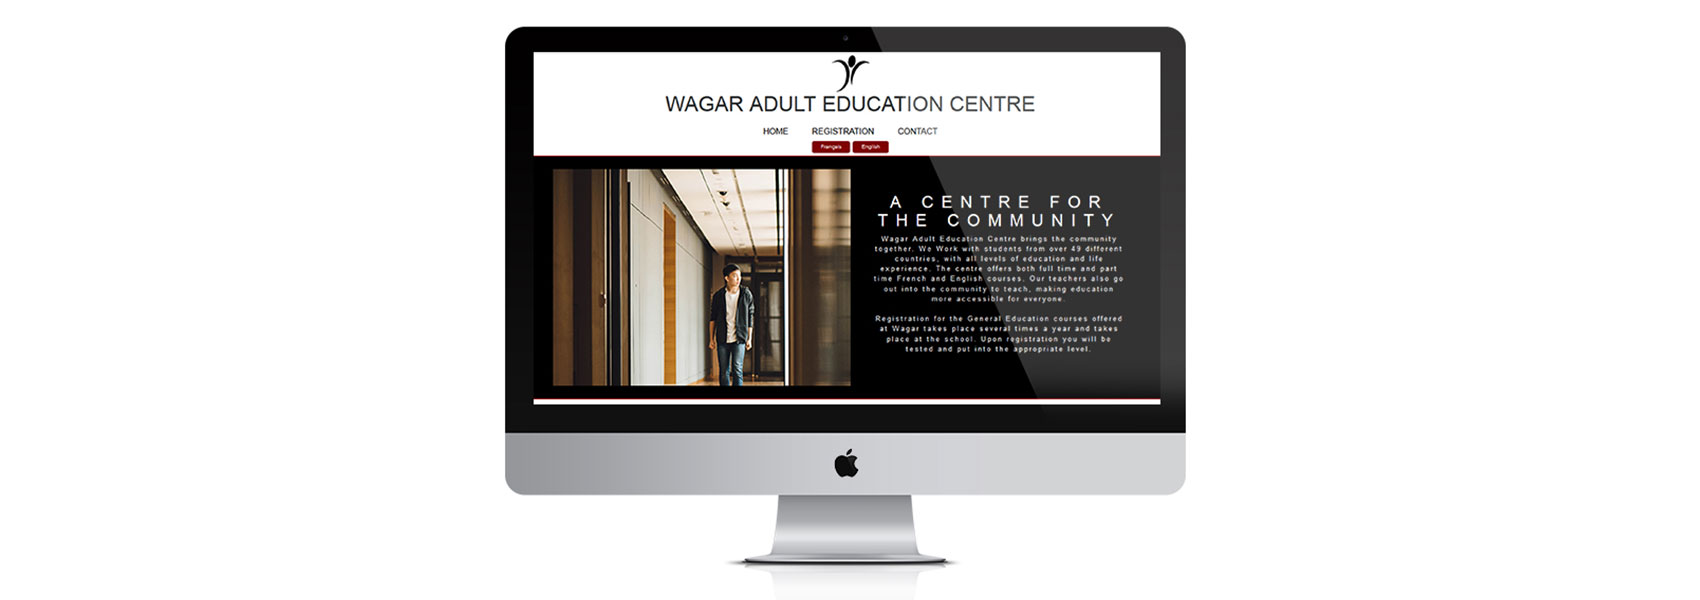 Landing page of Wagar Adult Education Centre